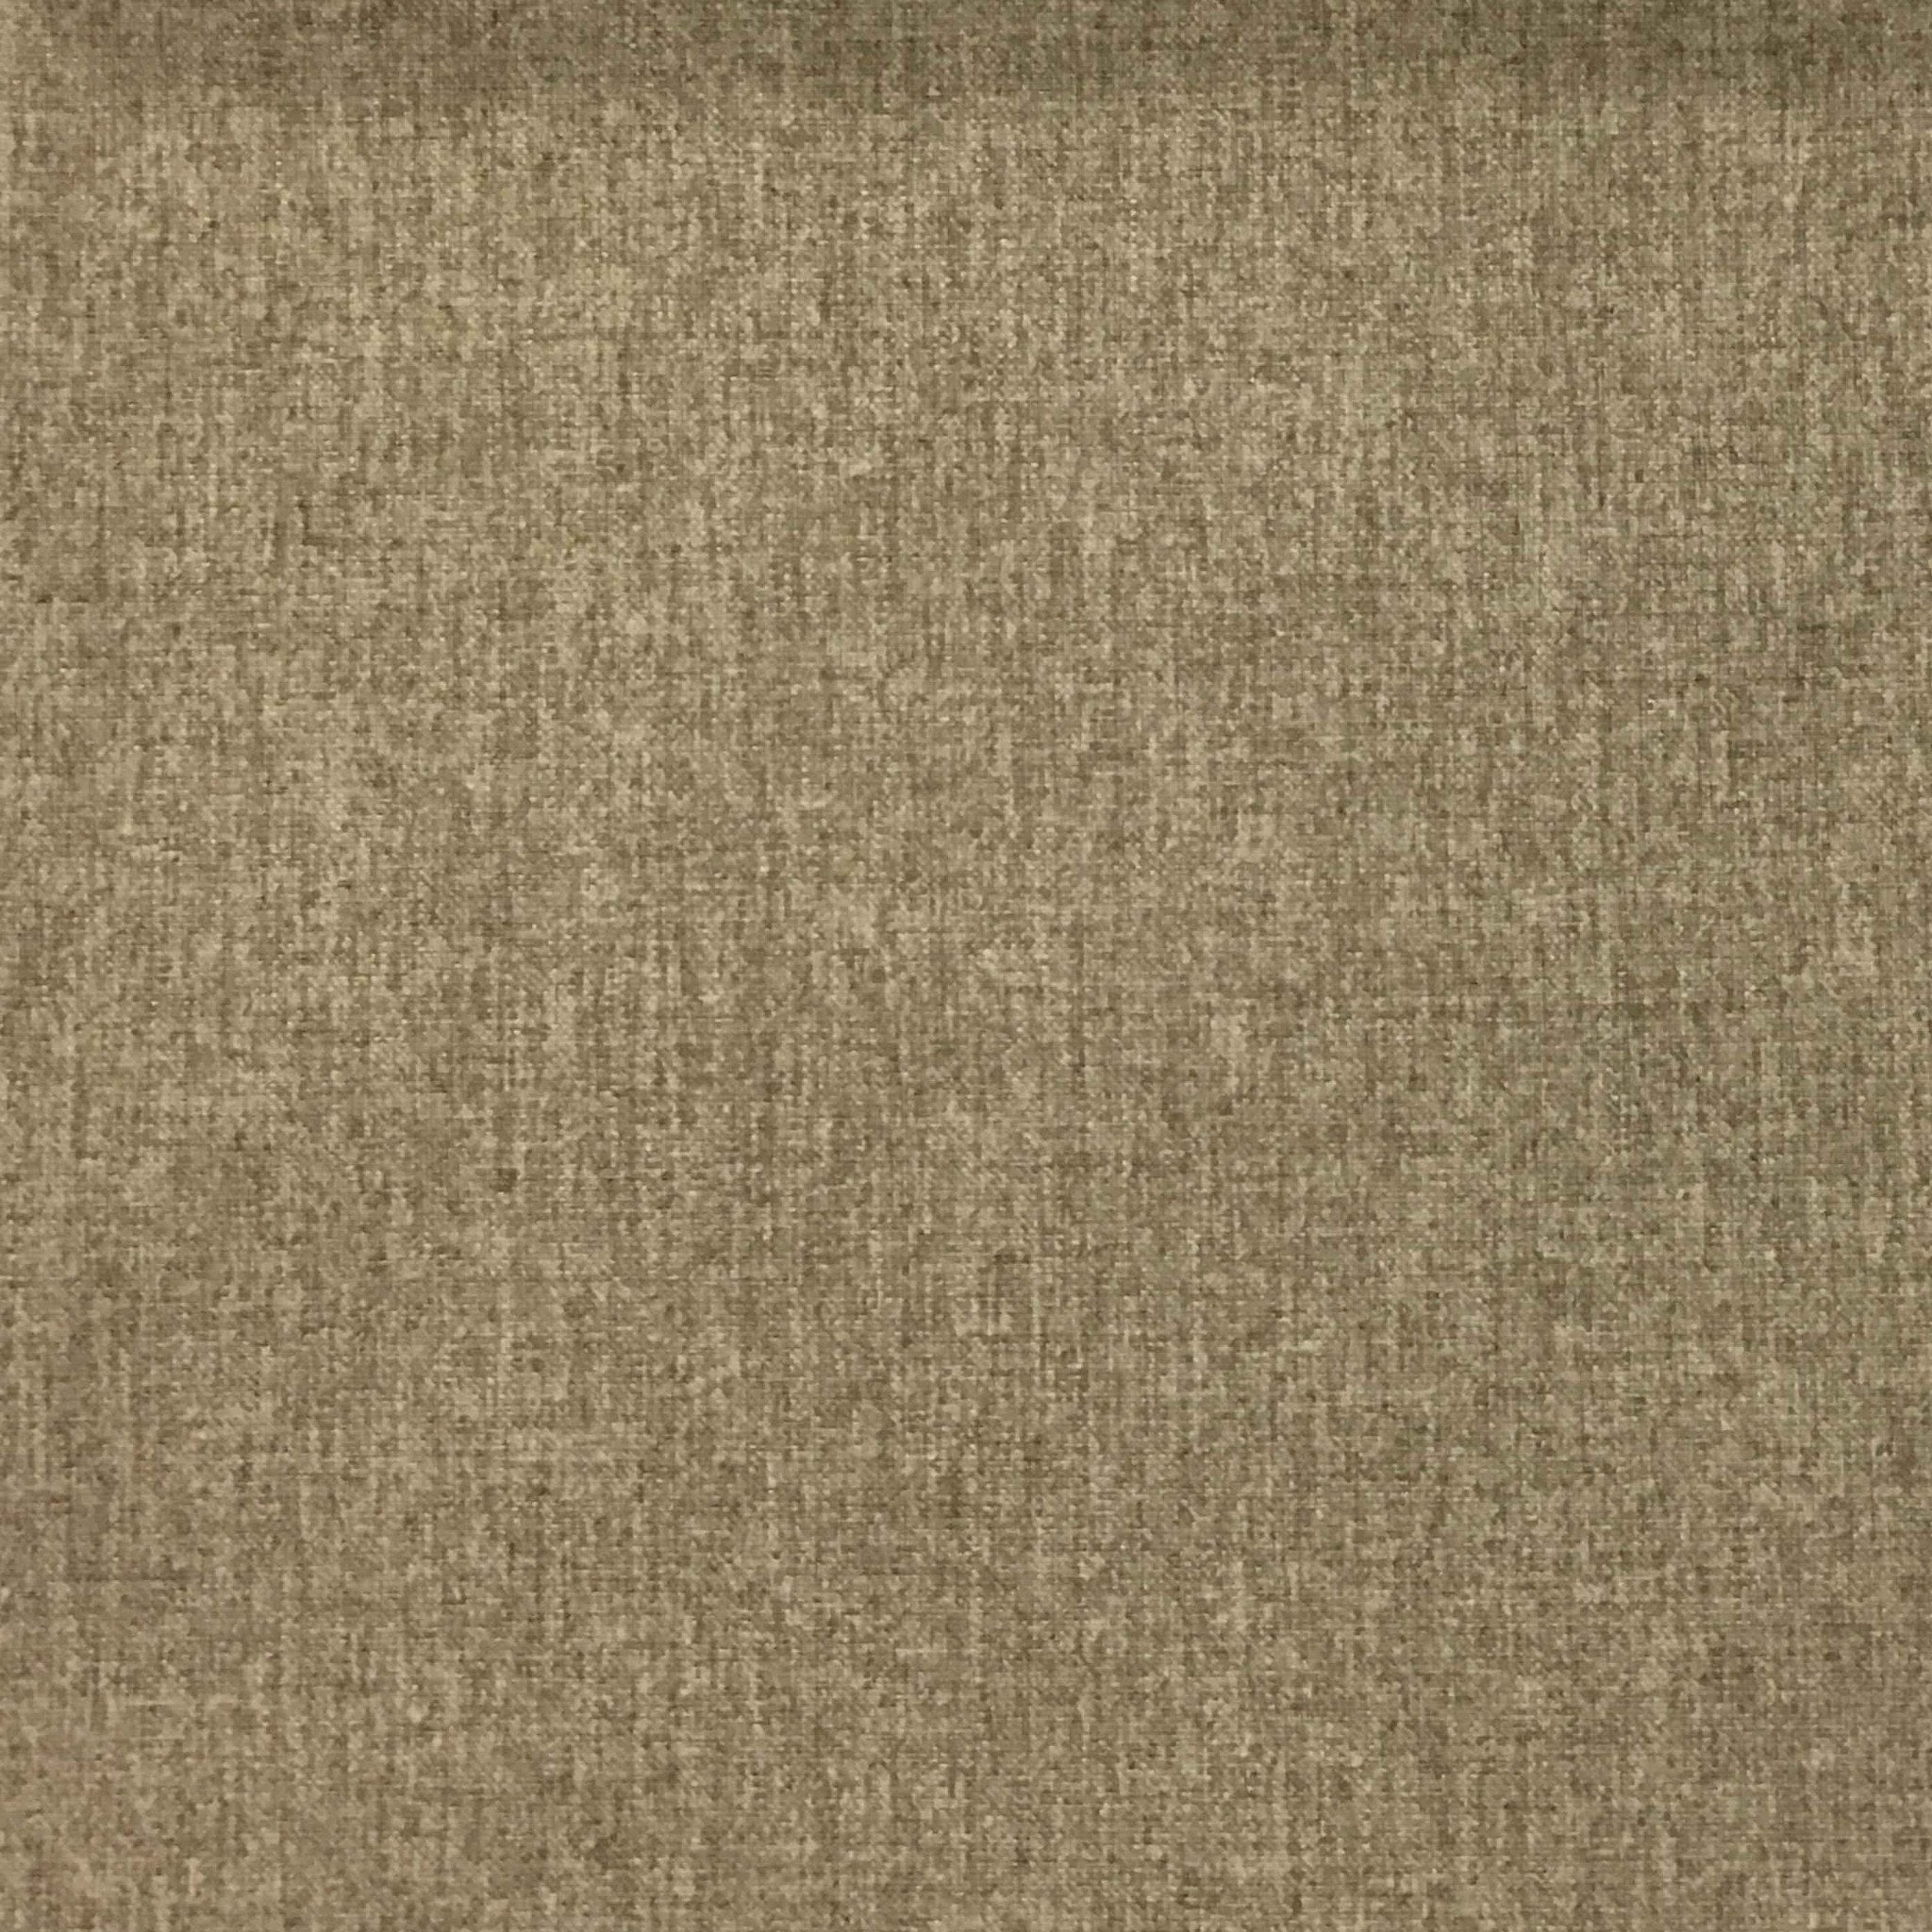 Thick Upholstery Fabric for Chair, Faux Coarse Linen Type Cloth